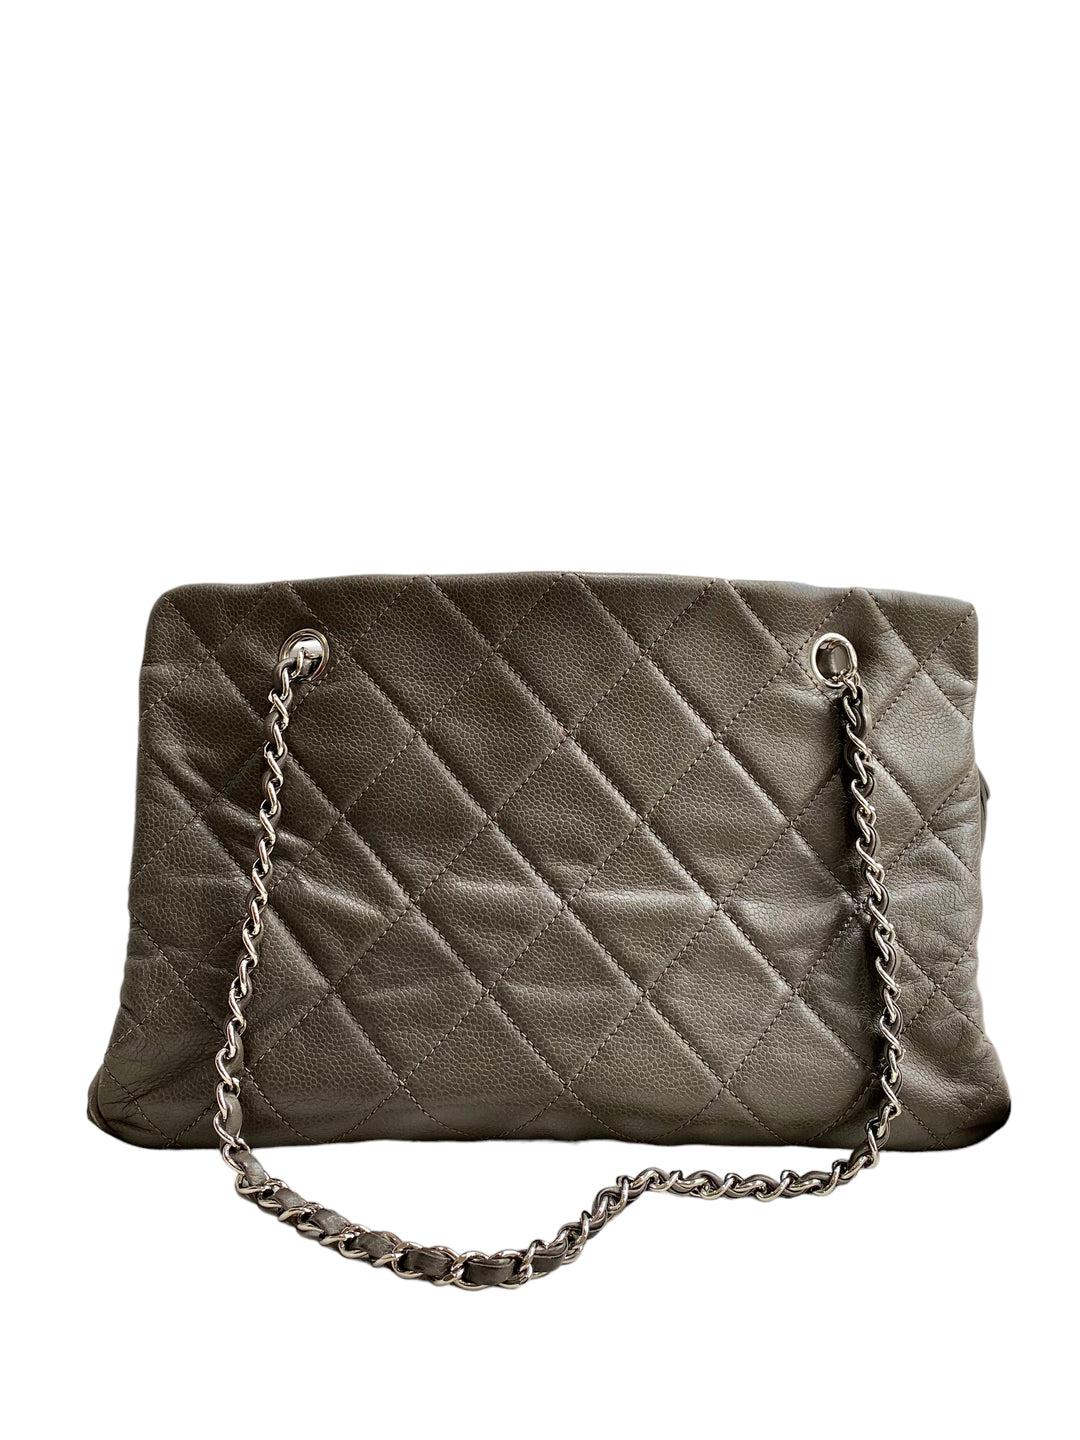 Chanel Tote Bag in Taupe  im Angebot 1